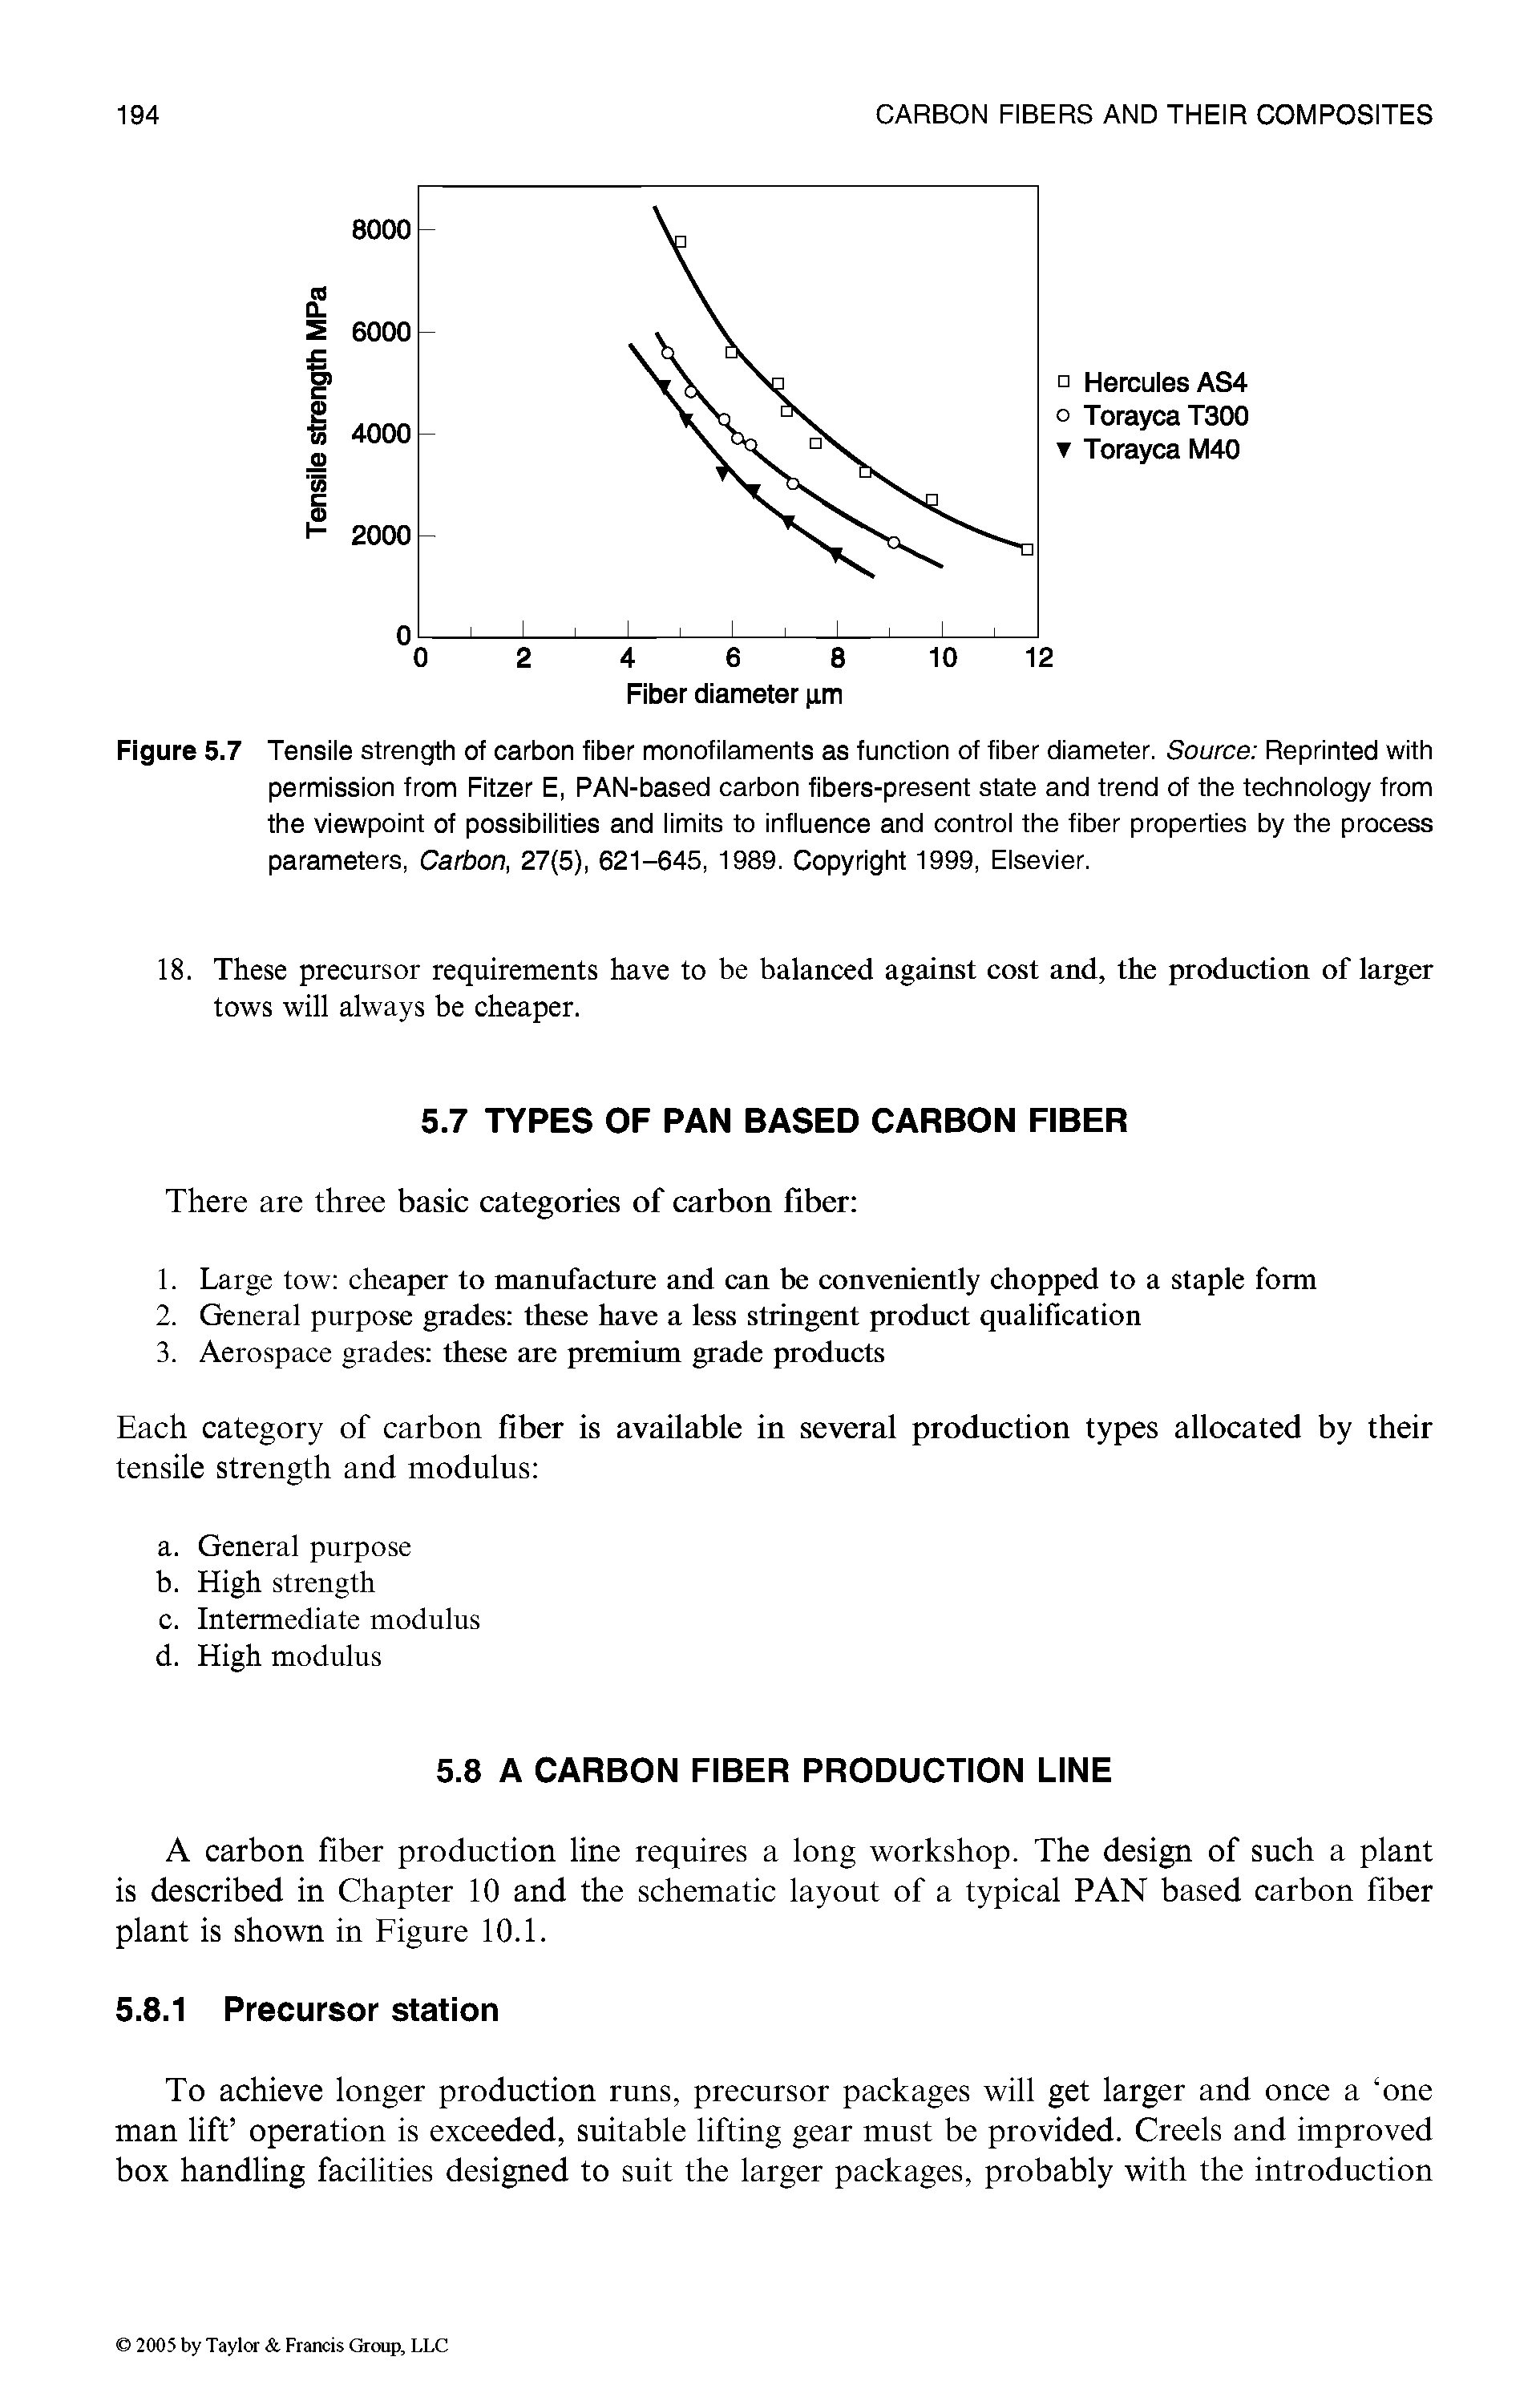 Figure 5.7 Tensile strength of carbon fiber monofilaments as function of fiber diameter. Source Reprinted with permission from Fitzer E, PAN-based carbon fibers-present state and trend of the technology from the viewpoint of possibilities and limits to influence and control the fiber properties by the process parameters, Carbon, 27(5), 621-645, 1989. Copyright 1999, Elsevier.